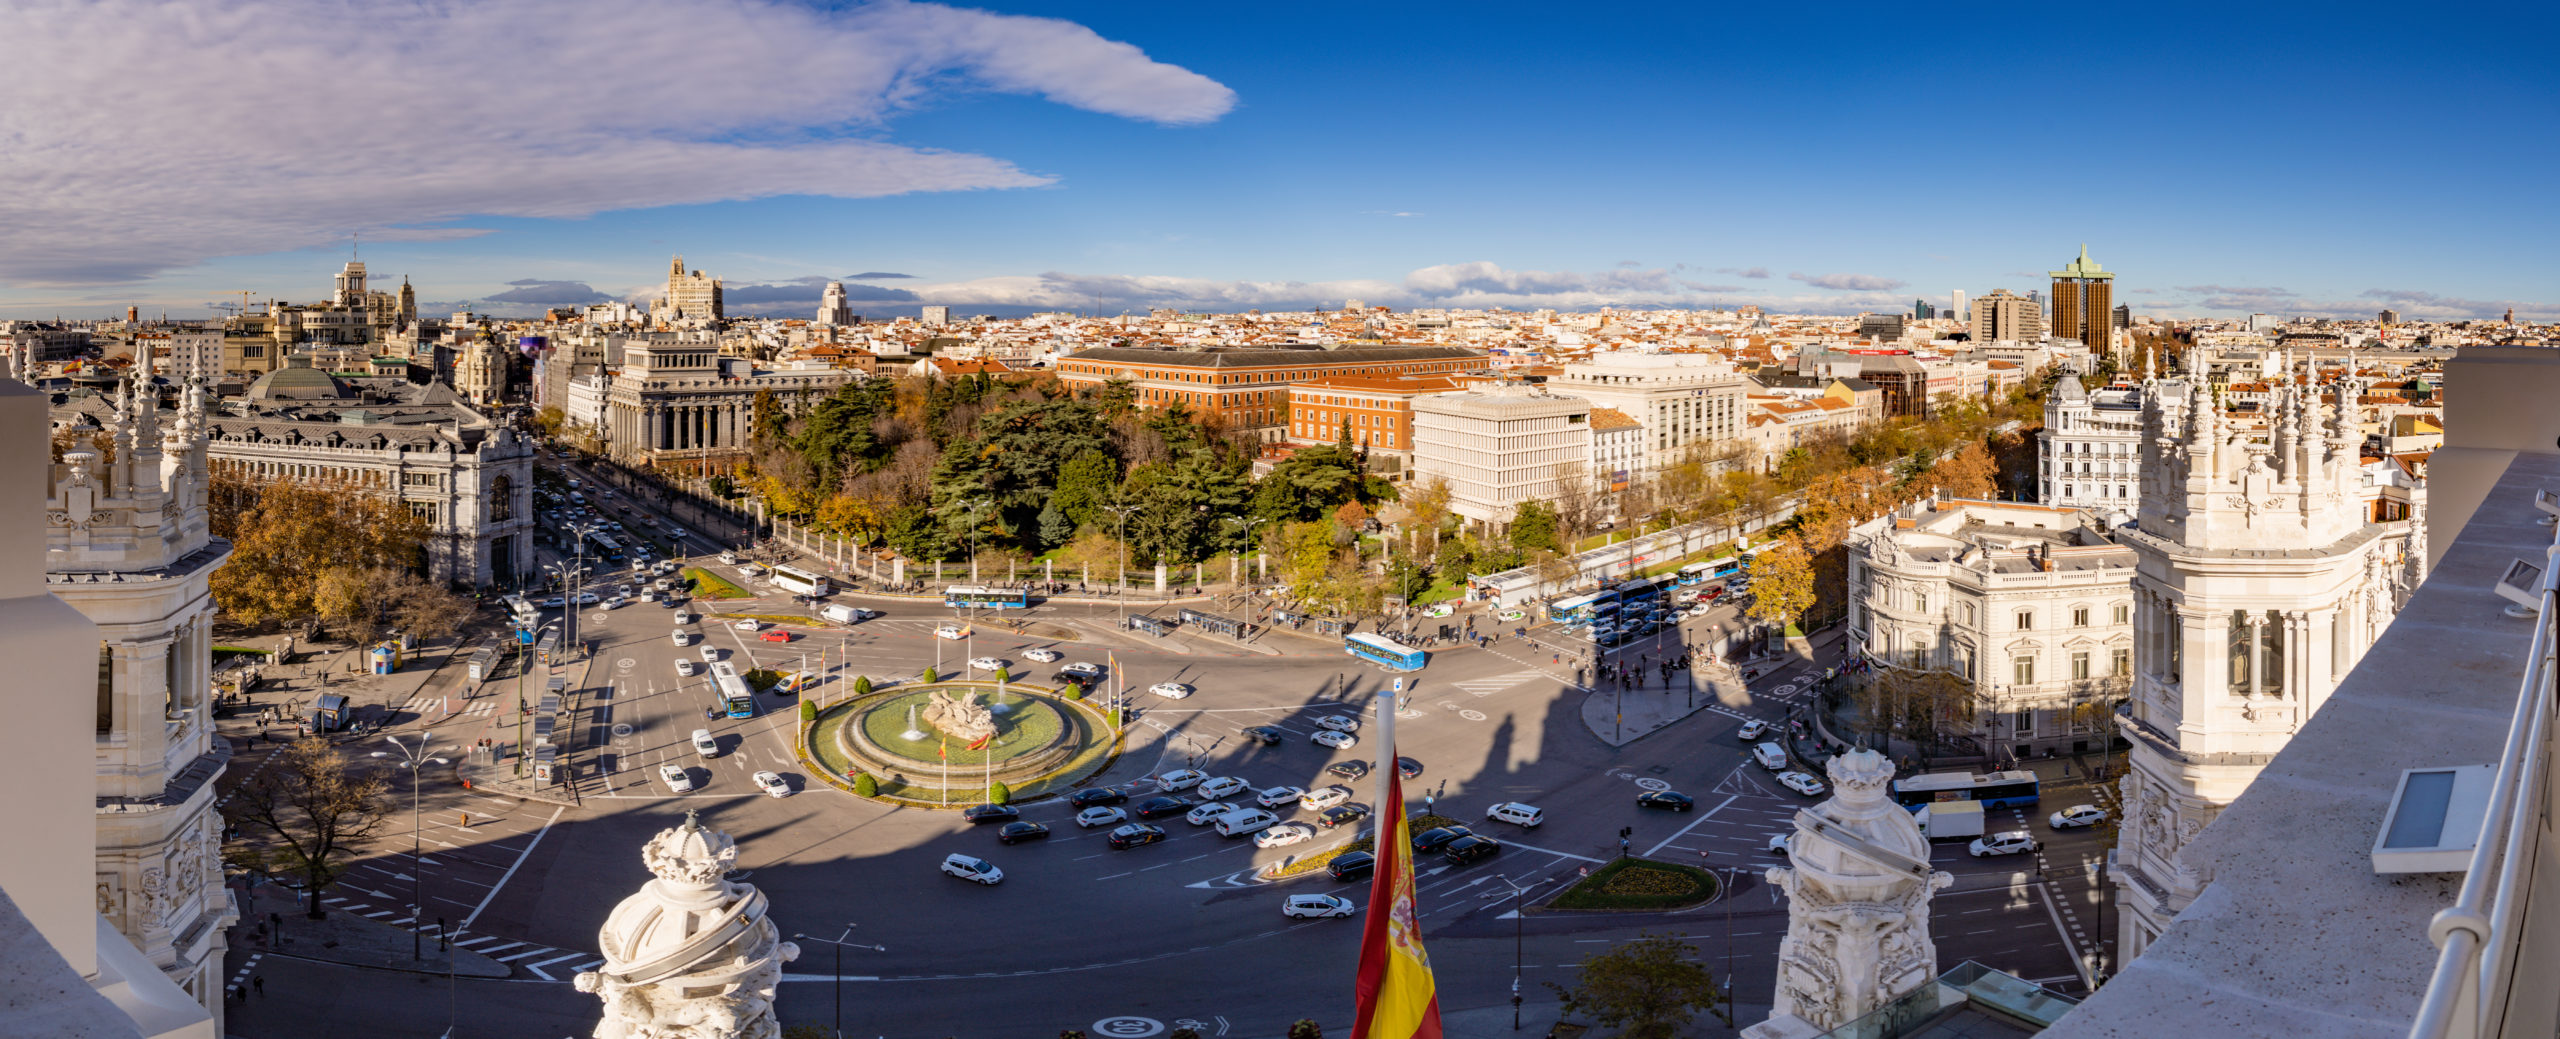 Top 5 Ways to Spend a Weekend in Madrid